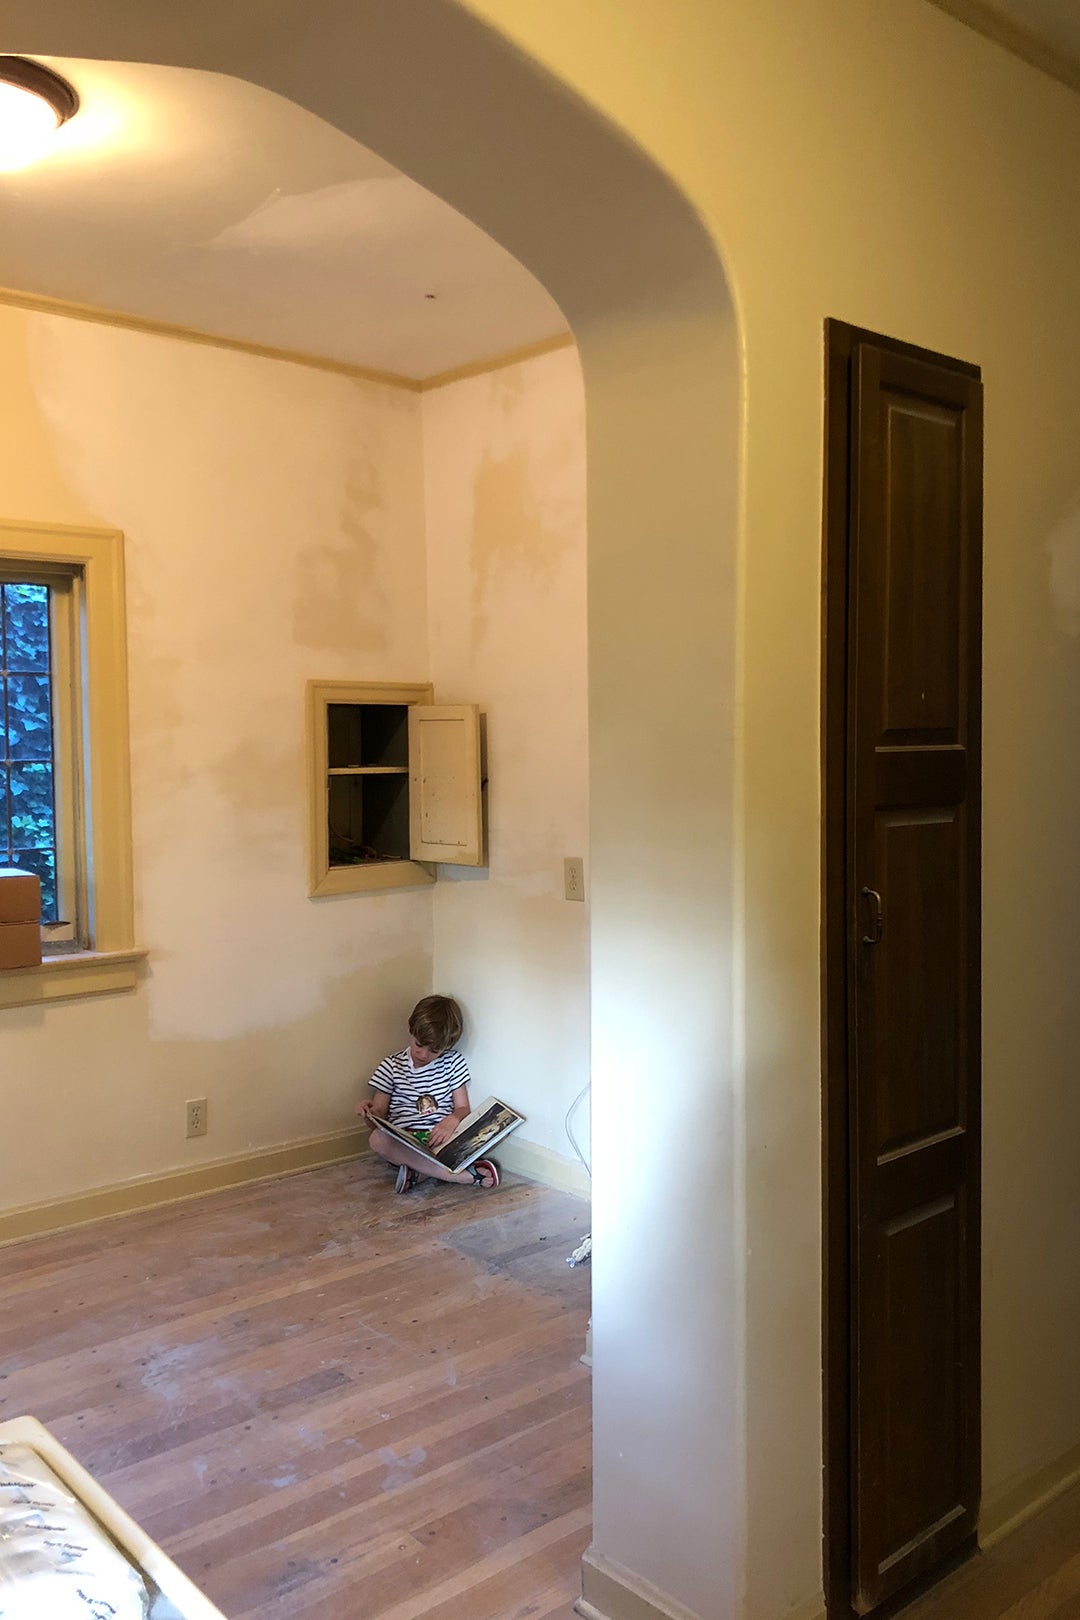 boy reading in unfinished room